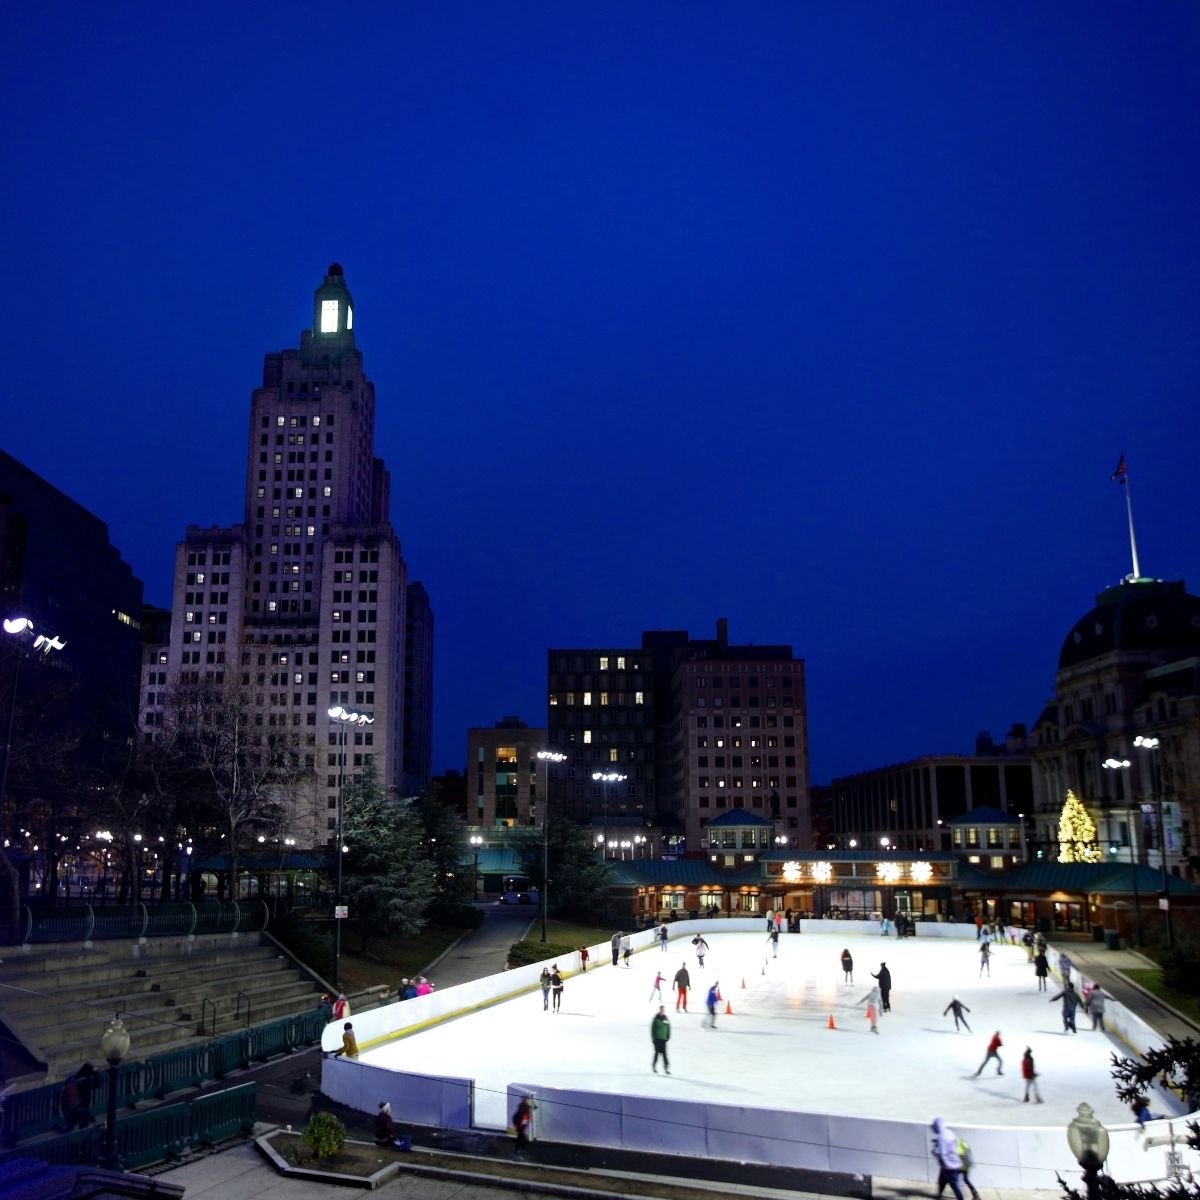 Ice rink in Providence, RI outdoors at night